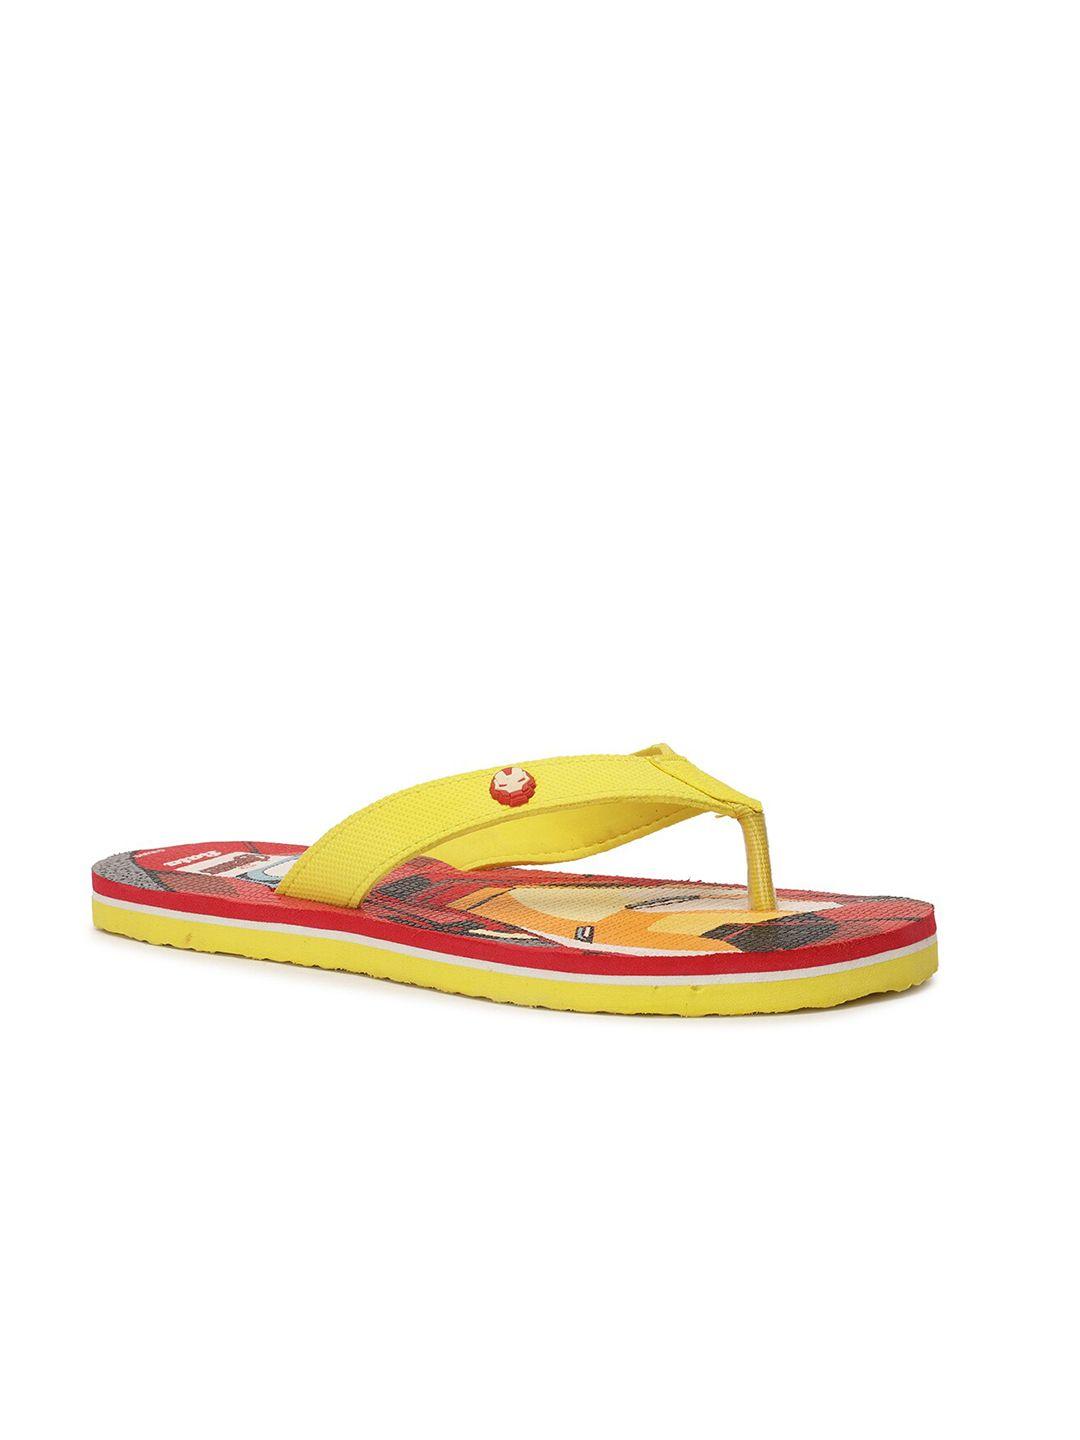 disney boys yellow & red printed room slippers